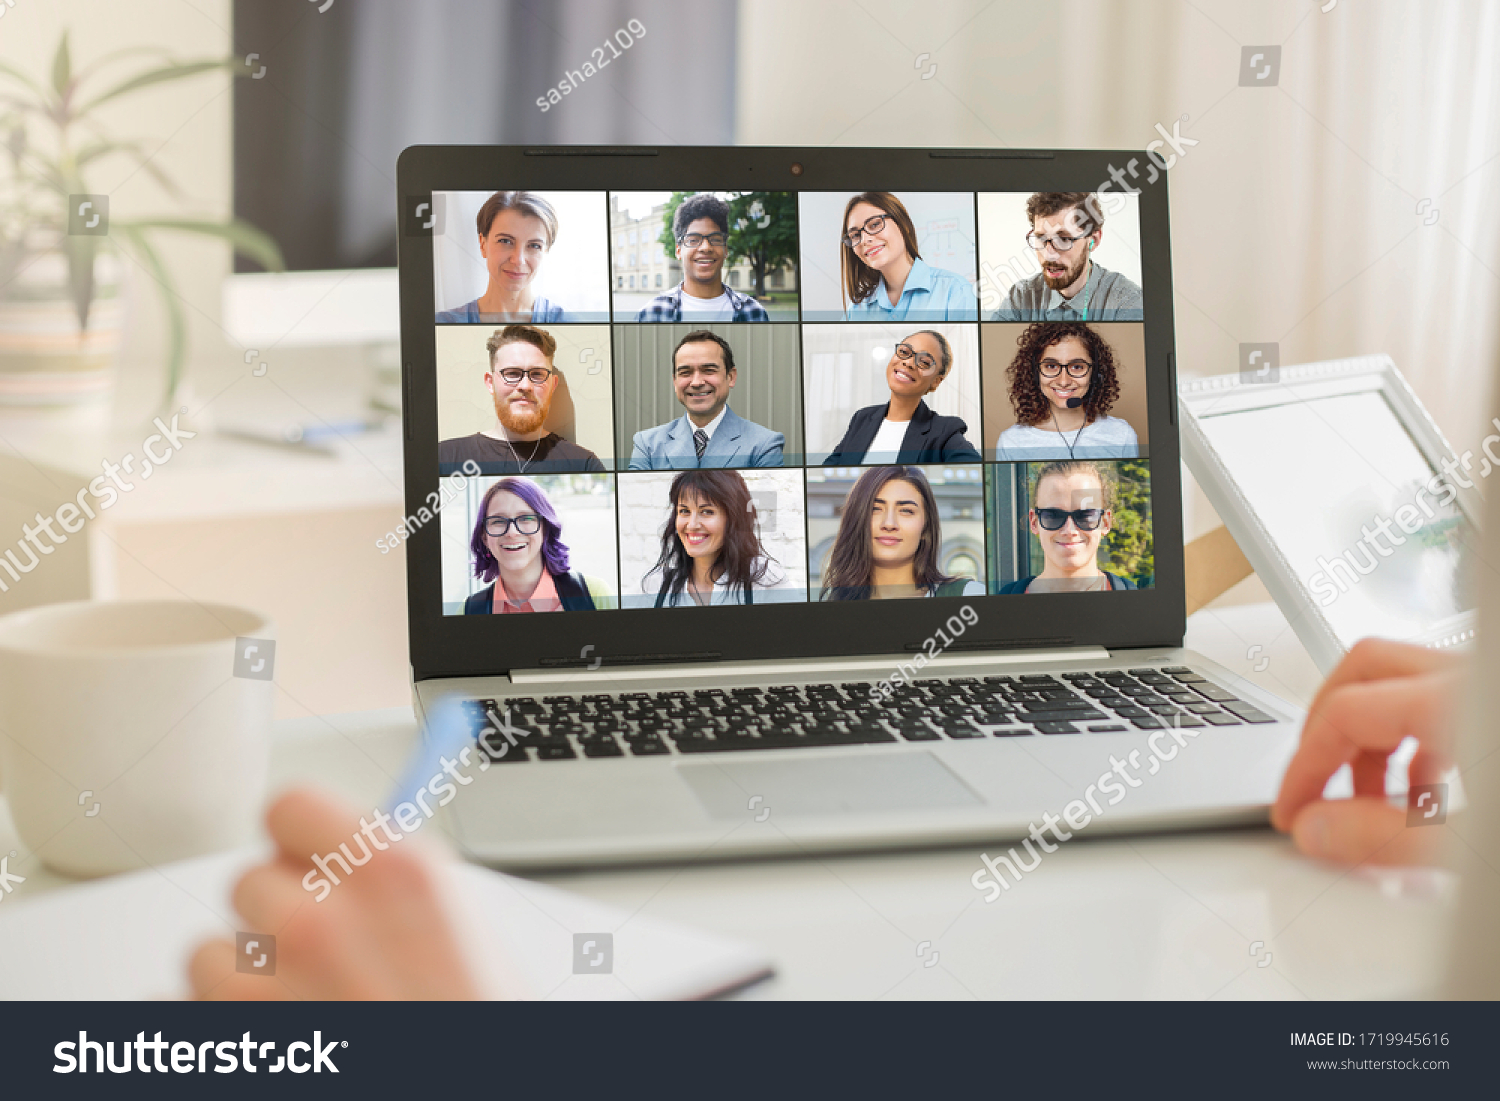 Online conference of colleagues through a laptop. Video call for training. Educational webinar chat between different people. Team meeting. #1719945616